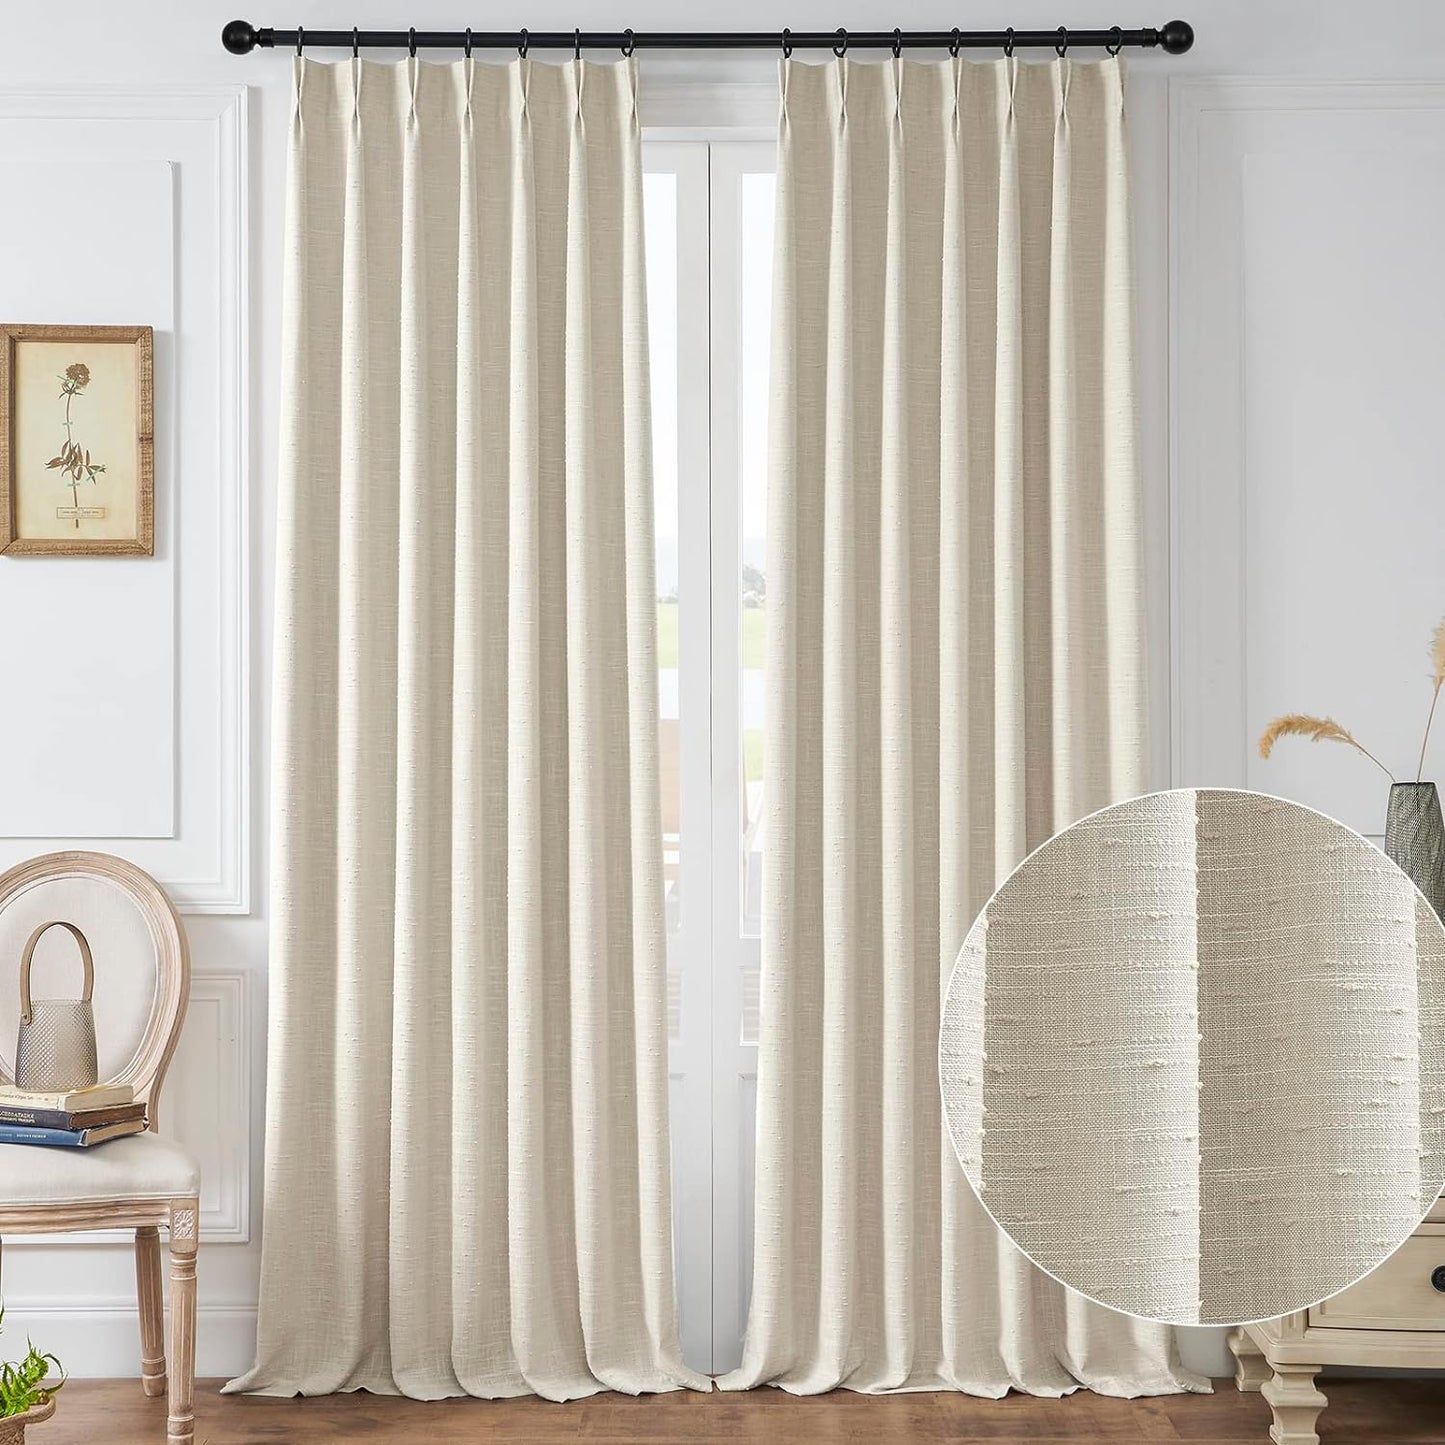 Maison Colette Pinch Pleat White Natural Linen Curtain 84 Inches Length for Bedroom,Back Tab Semi Sheer Window Treatment Drapes for Living Room,2 Panels,40" Width  Maison Colette Home Linen 40"W X 95"L With Liner 